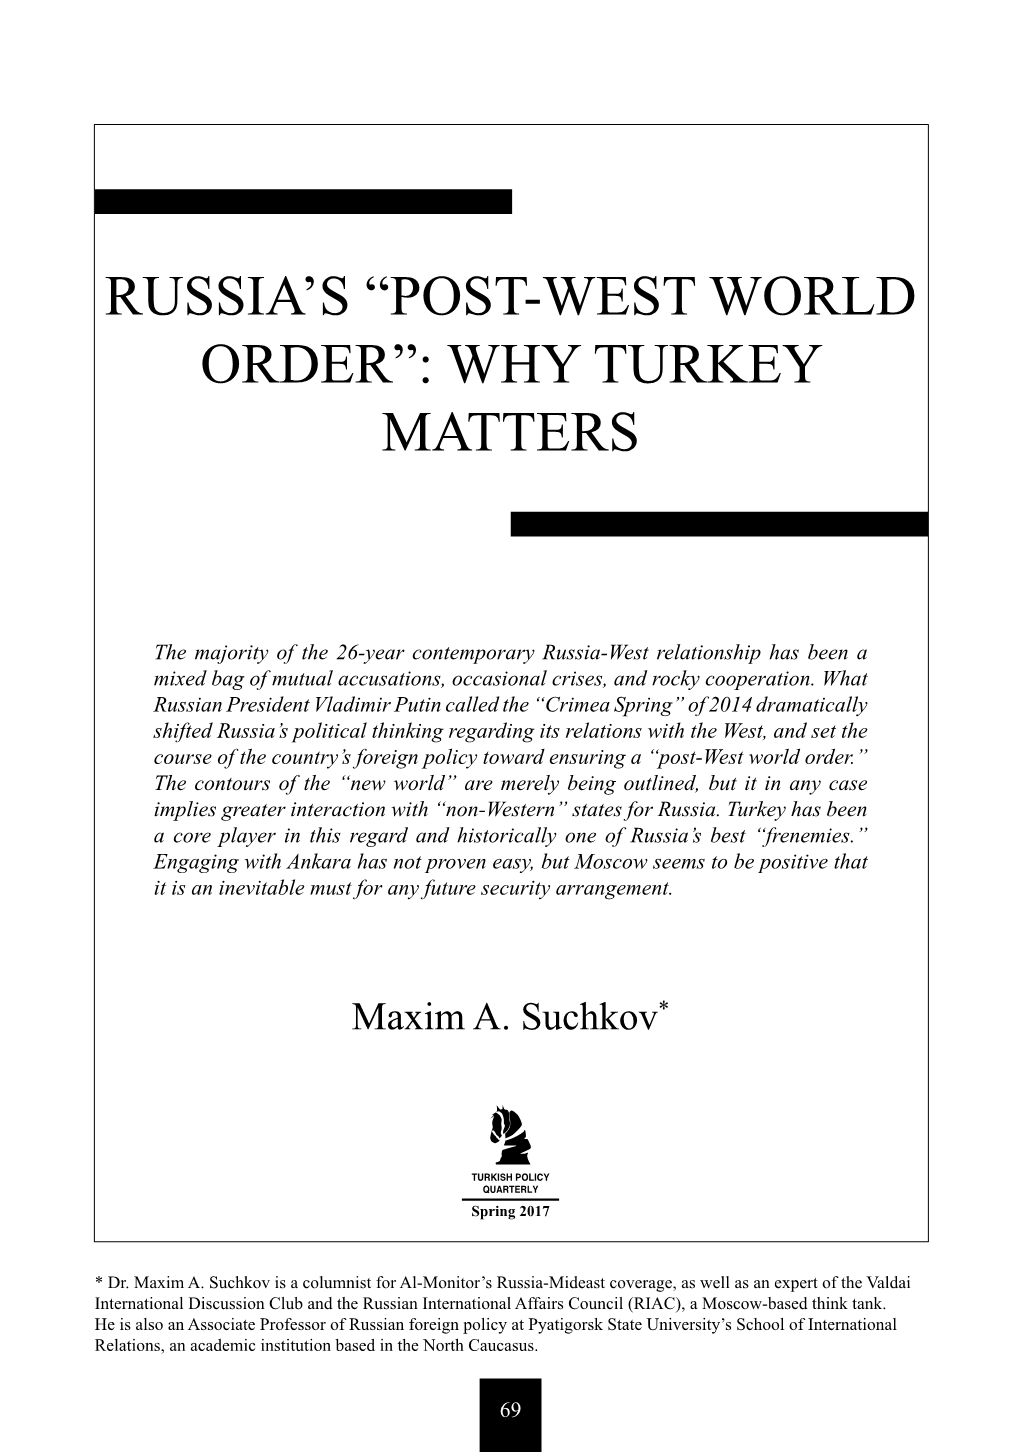 Russia's “Post-West World Order”: Why Turkey Matters